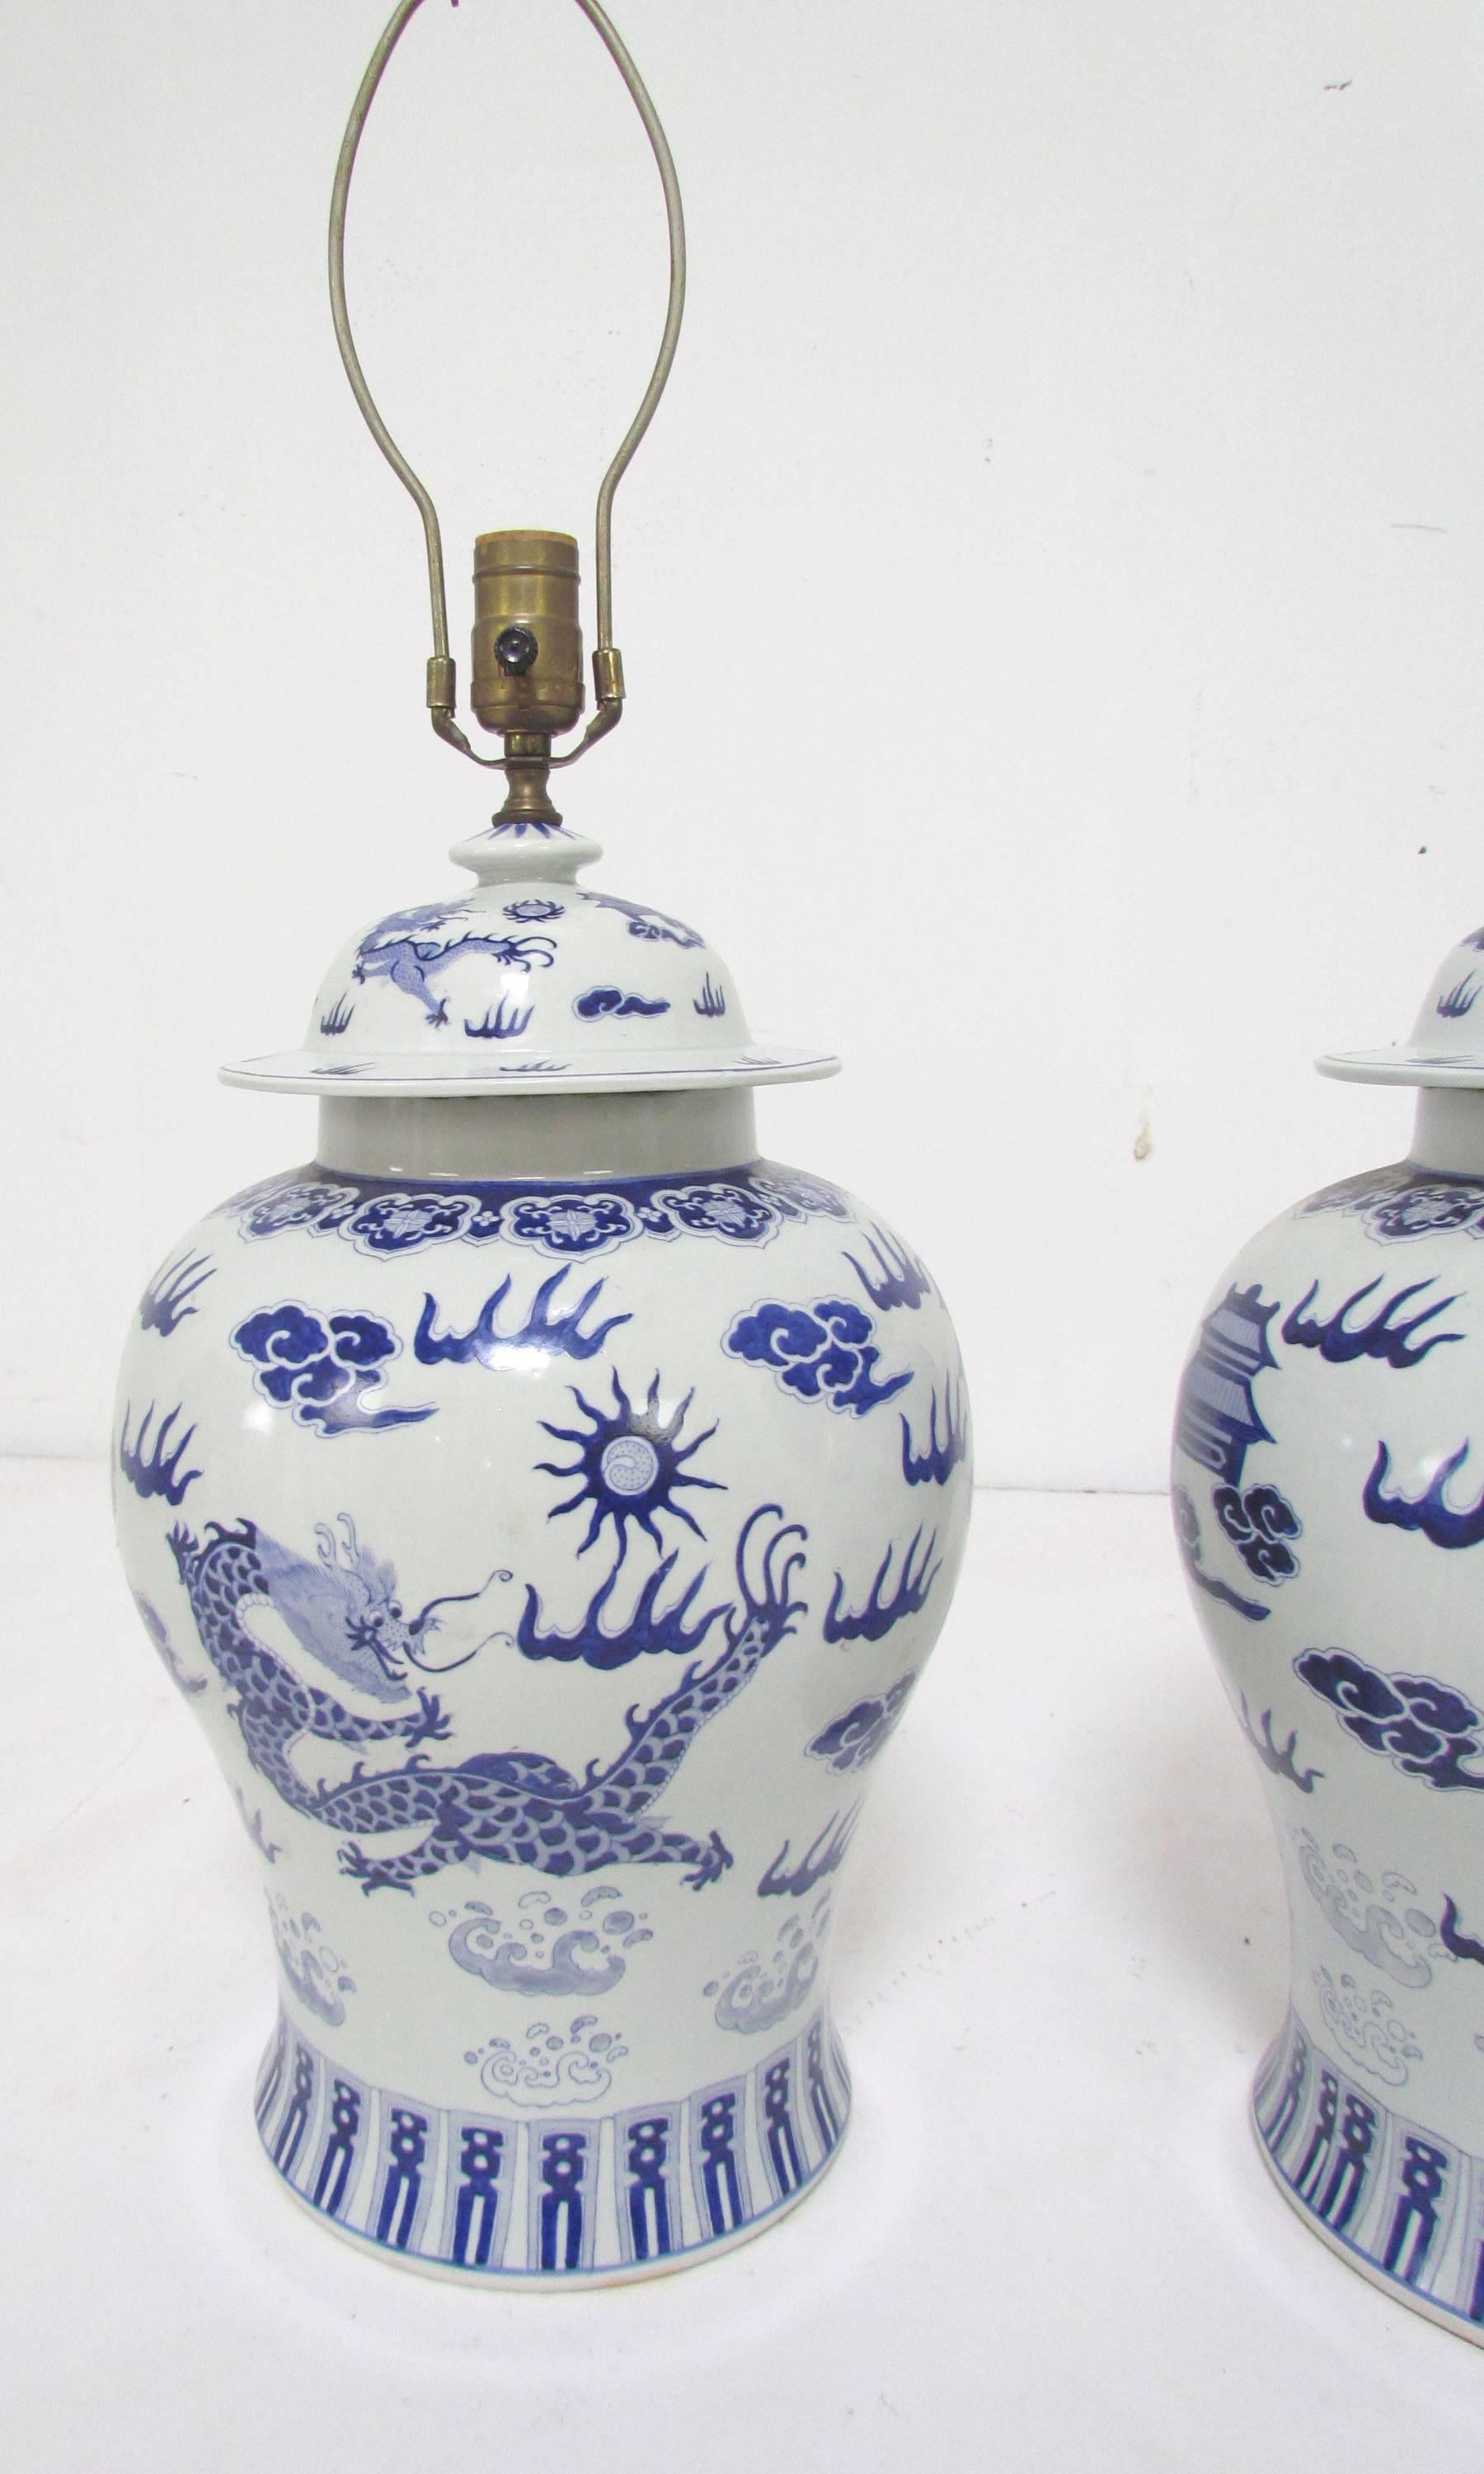 Pair of blue and white porcelain temple or ginger jar lamps with a Chinese dragon motif, circa late 19th century, converted to lamps, circa mid-20th century. 

Measure 29